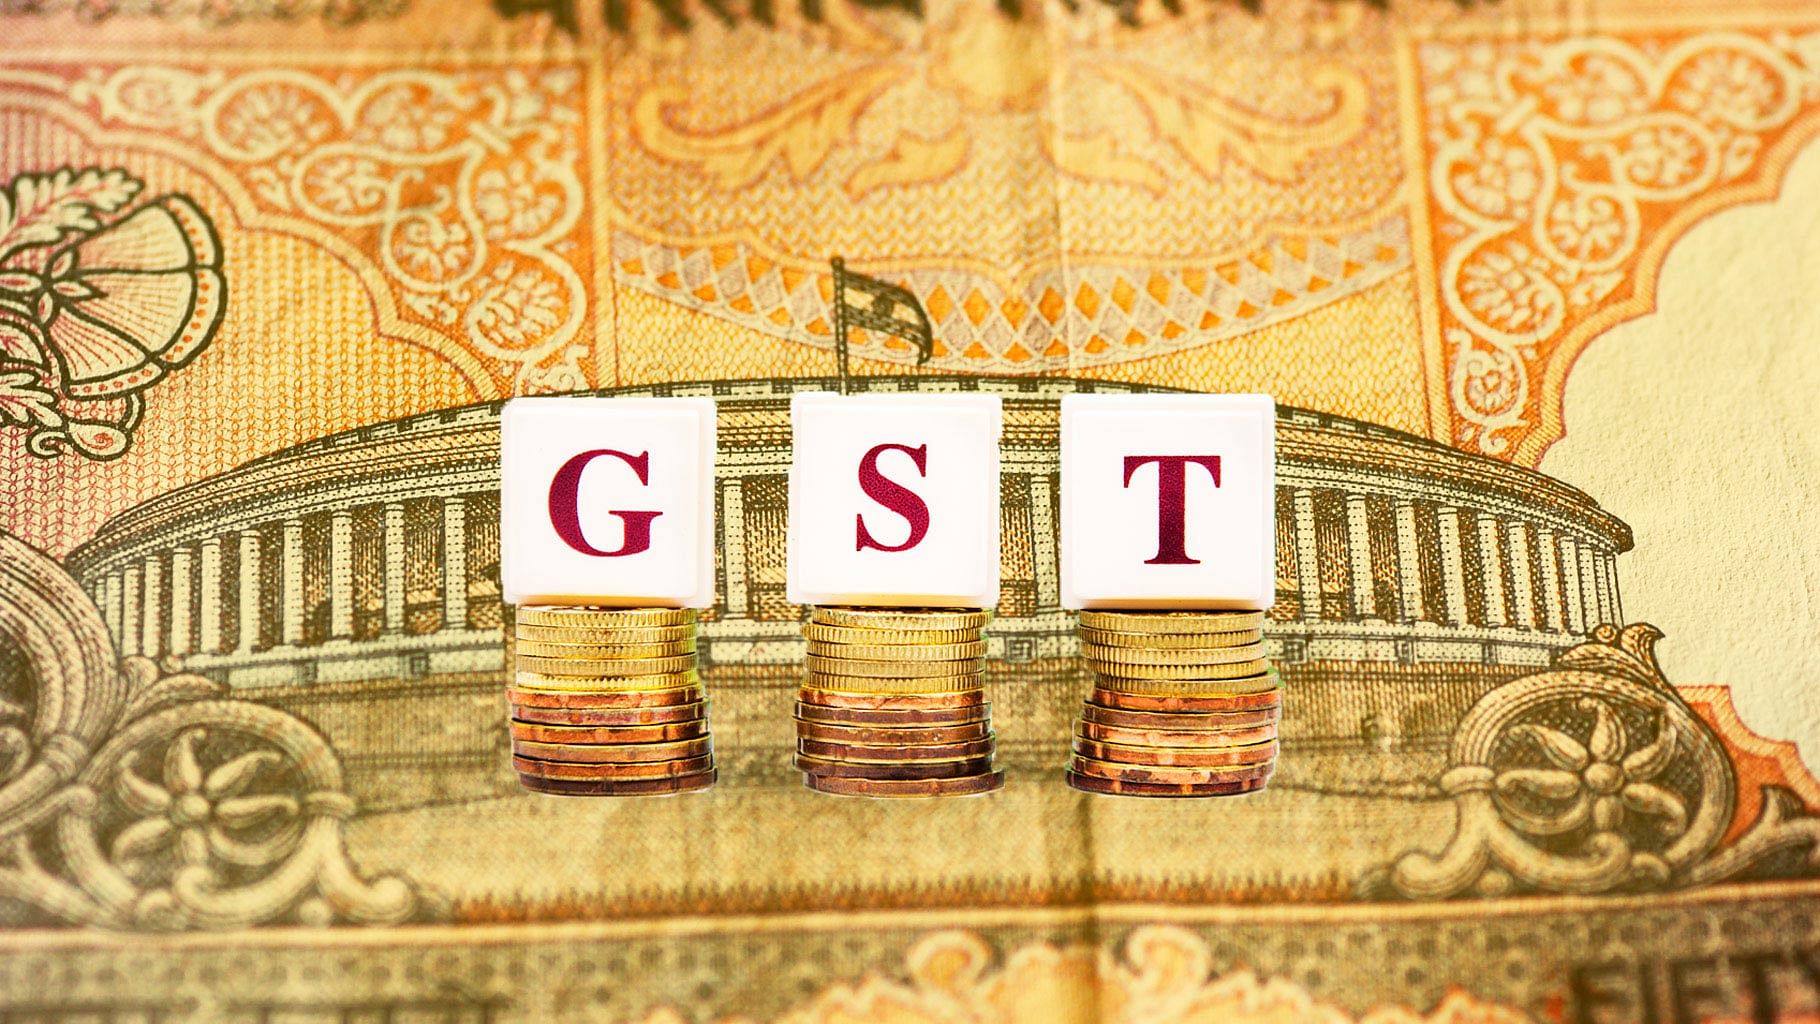 The announcement came after&nbsp;the government had earlier asked banks to pay service tax and GST retrospectively on free services provided to select customers.